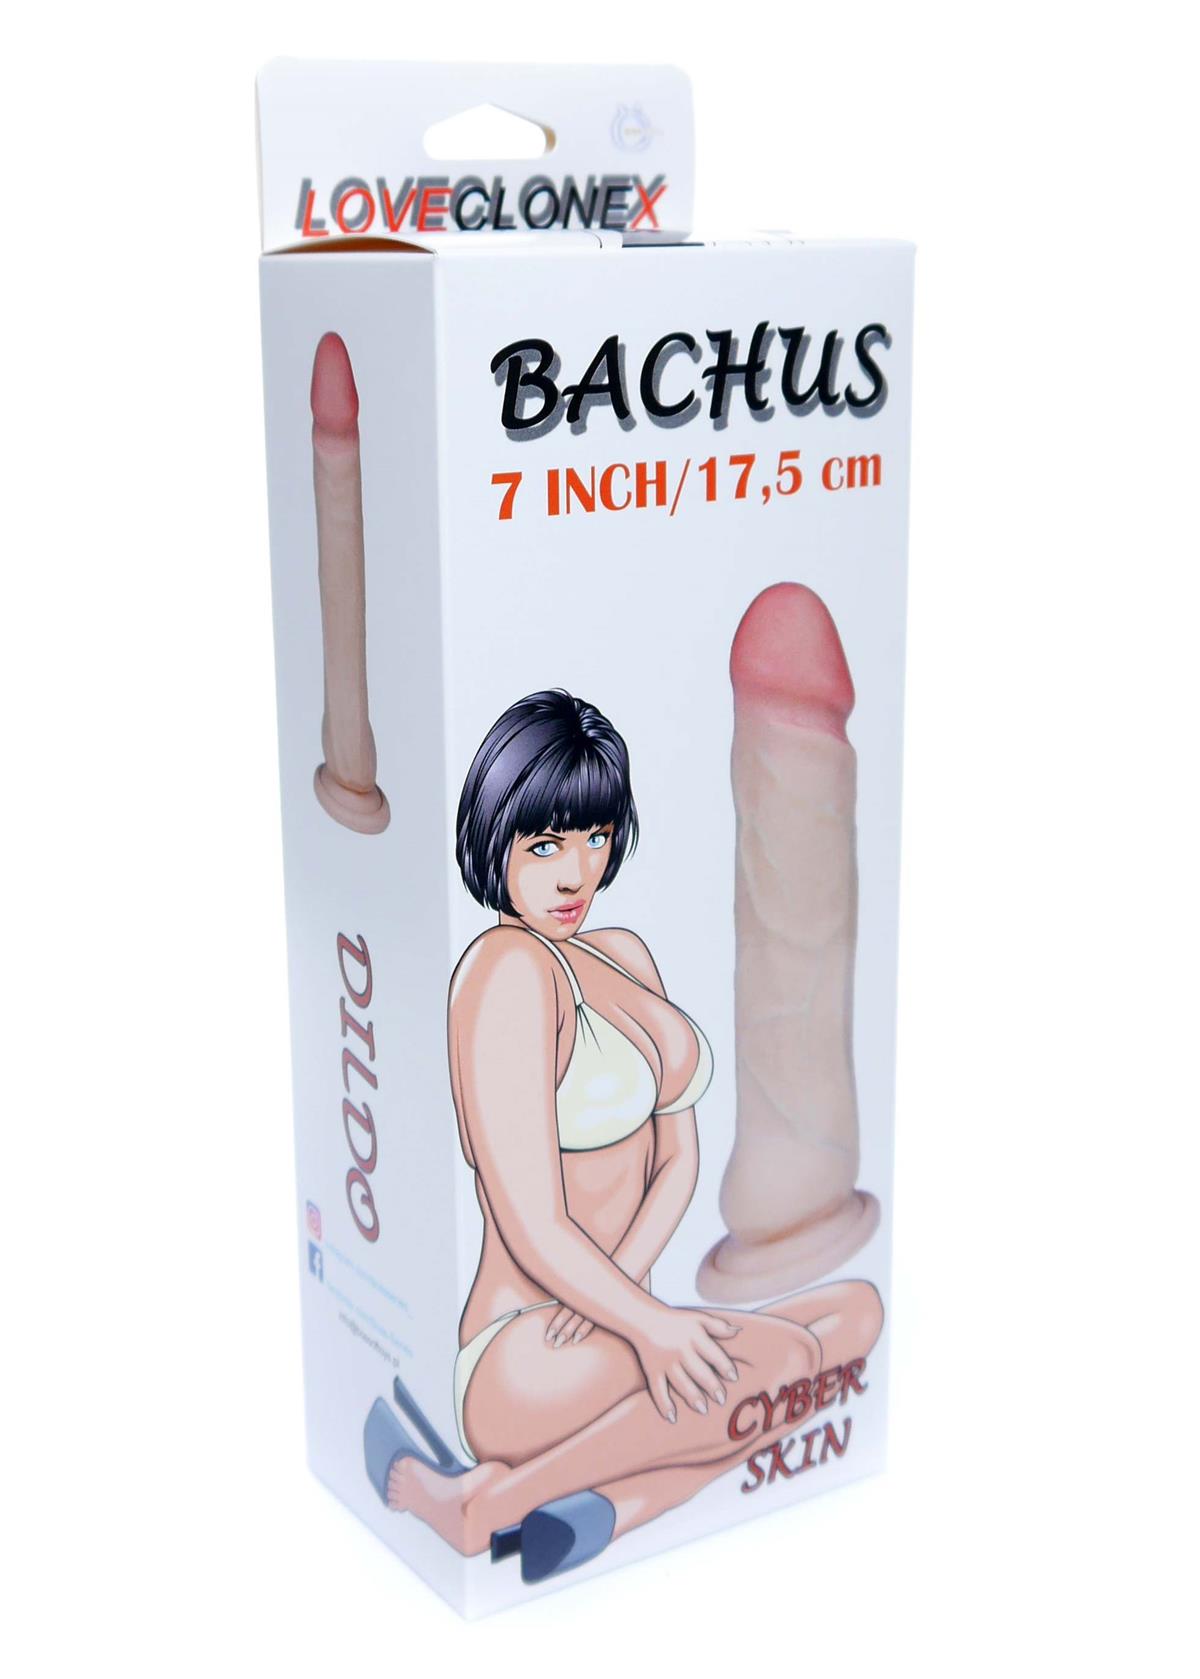 Bossoftoys Bachus Ultra Realistic Dildo 7 inch / 21 cm - 21-00027 - skin feels like real - Better then Silicone - 4 cm thick - Suction Cup - Flesh -